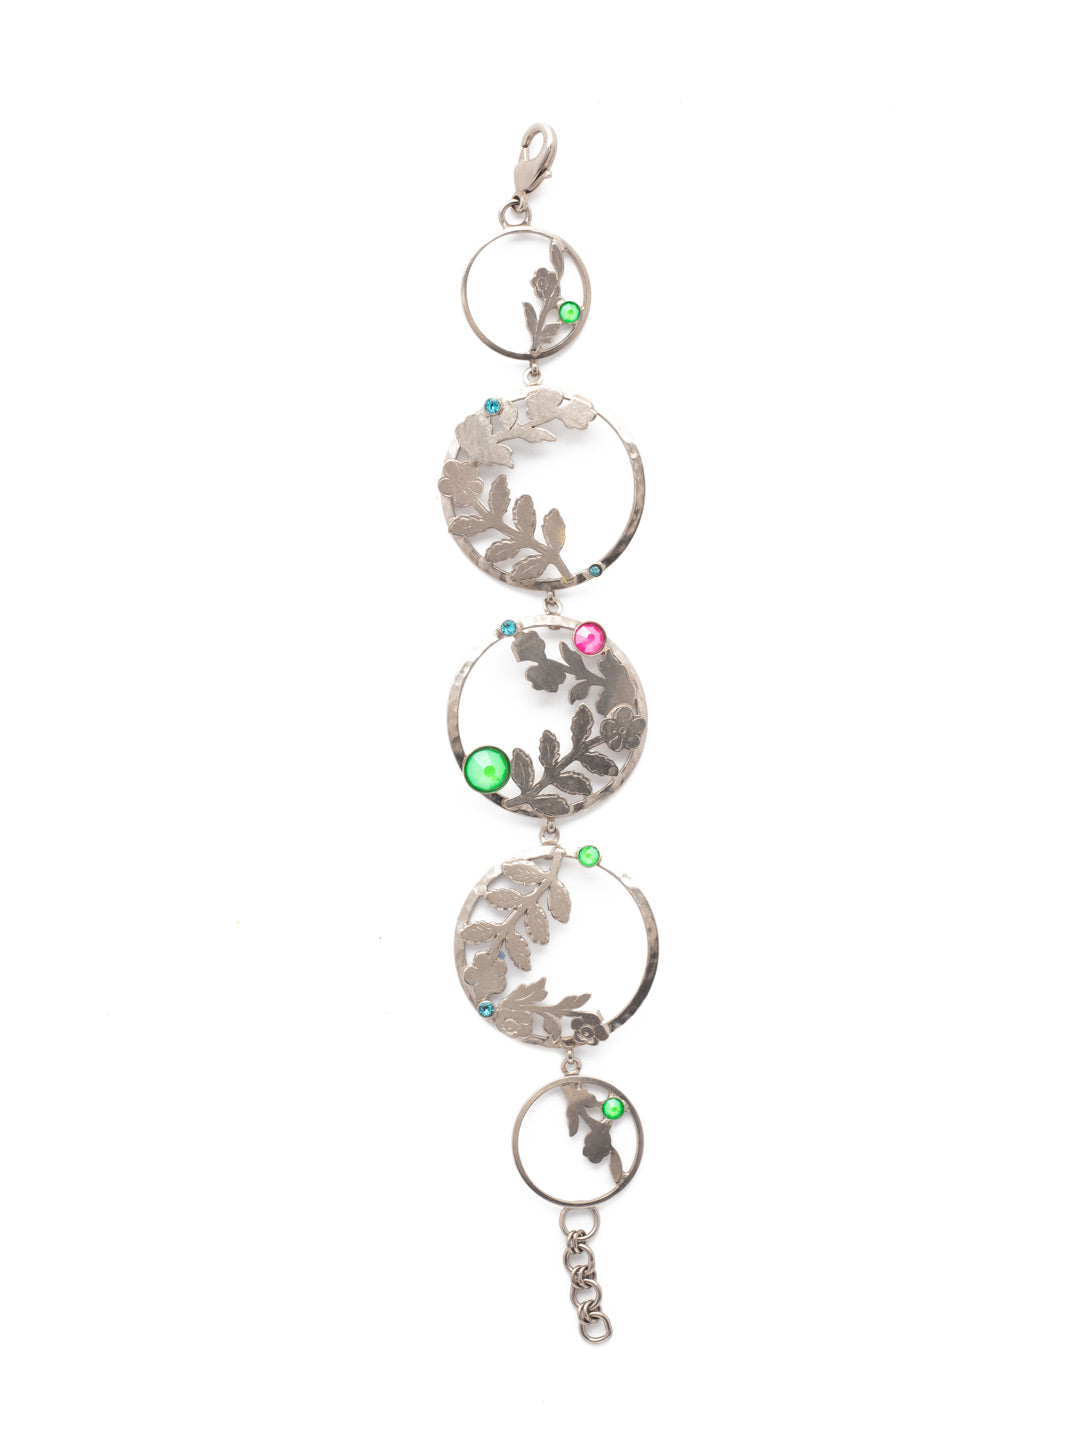 Calypso Statement Bracelet - BEV56ASWDW - <p>Love hoops and metalwork? If you answered "yes," the Calypso Statement Bracelet is a must. Metallic leaf detailing is accented with sparkling crystals. From Sorrelli's Wild Watermelon collection in our Antique Silver-tone finish.</p>